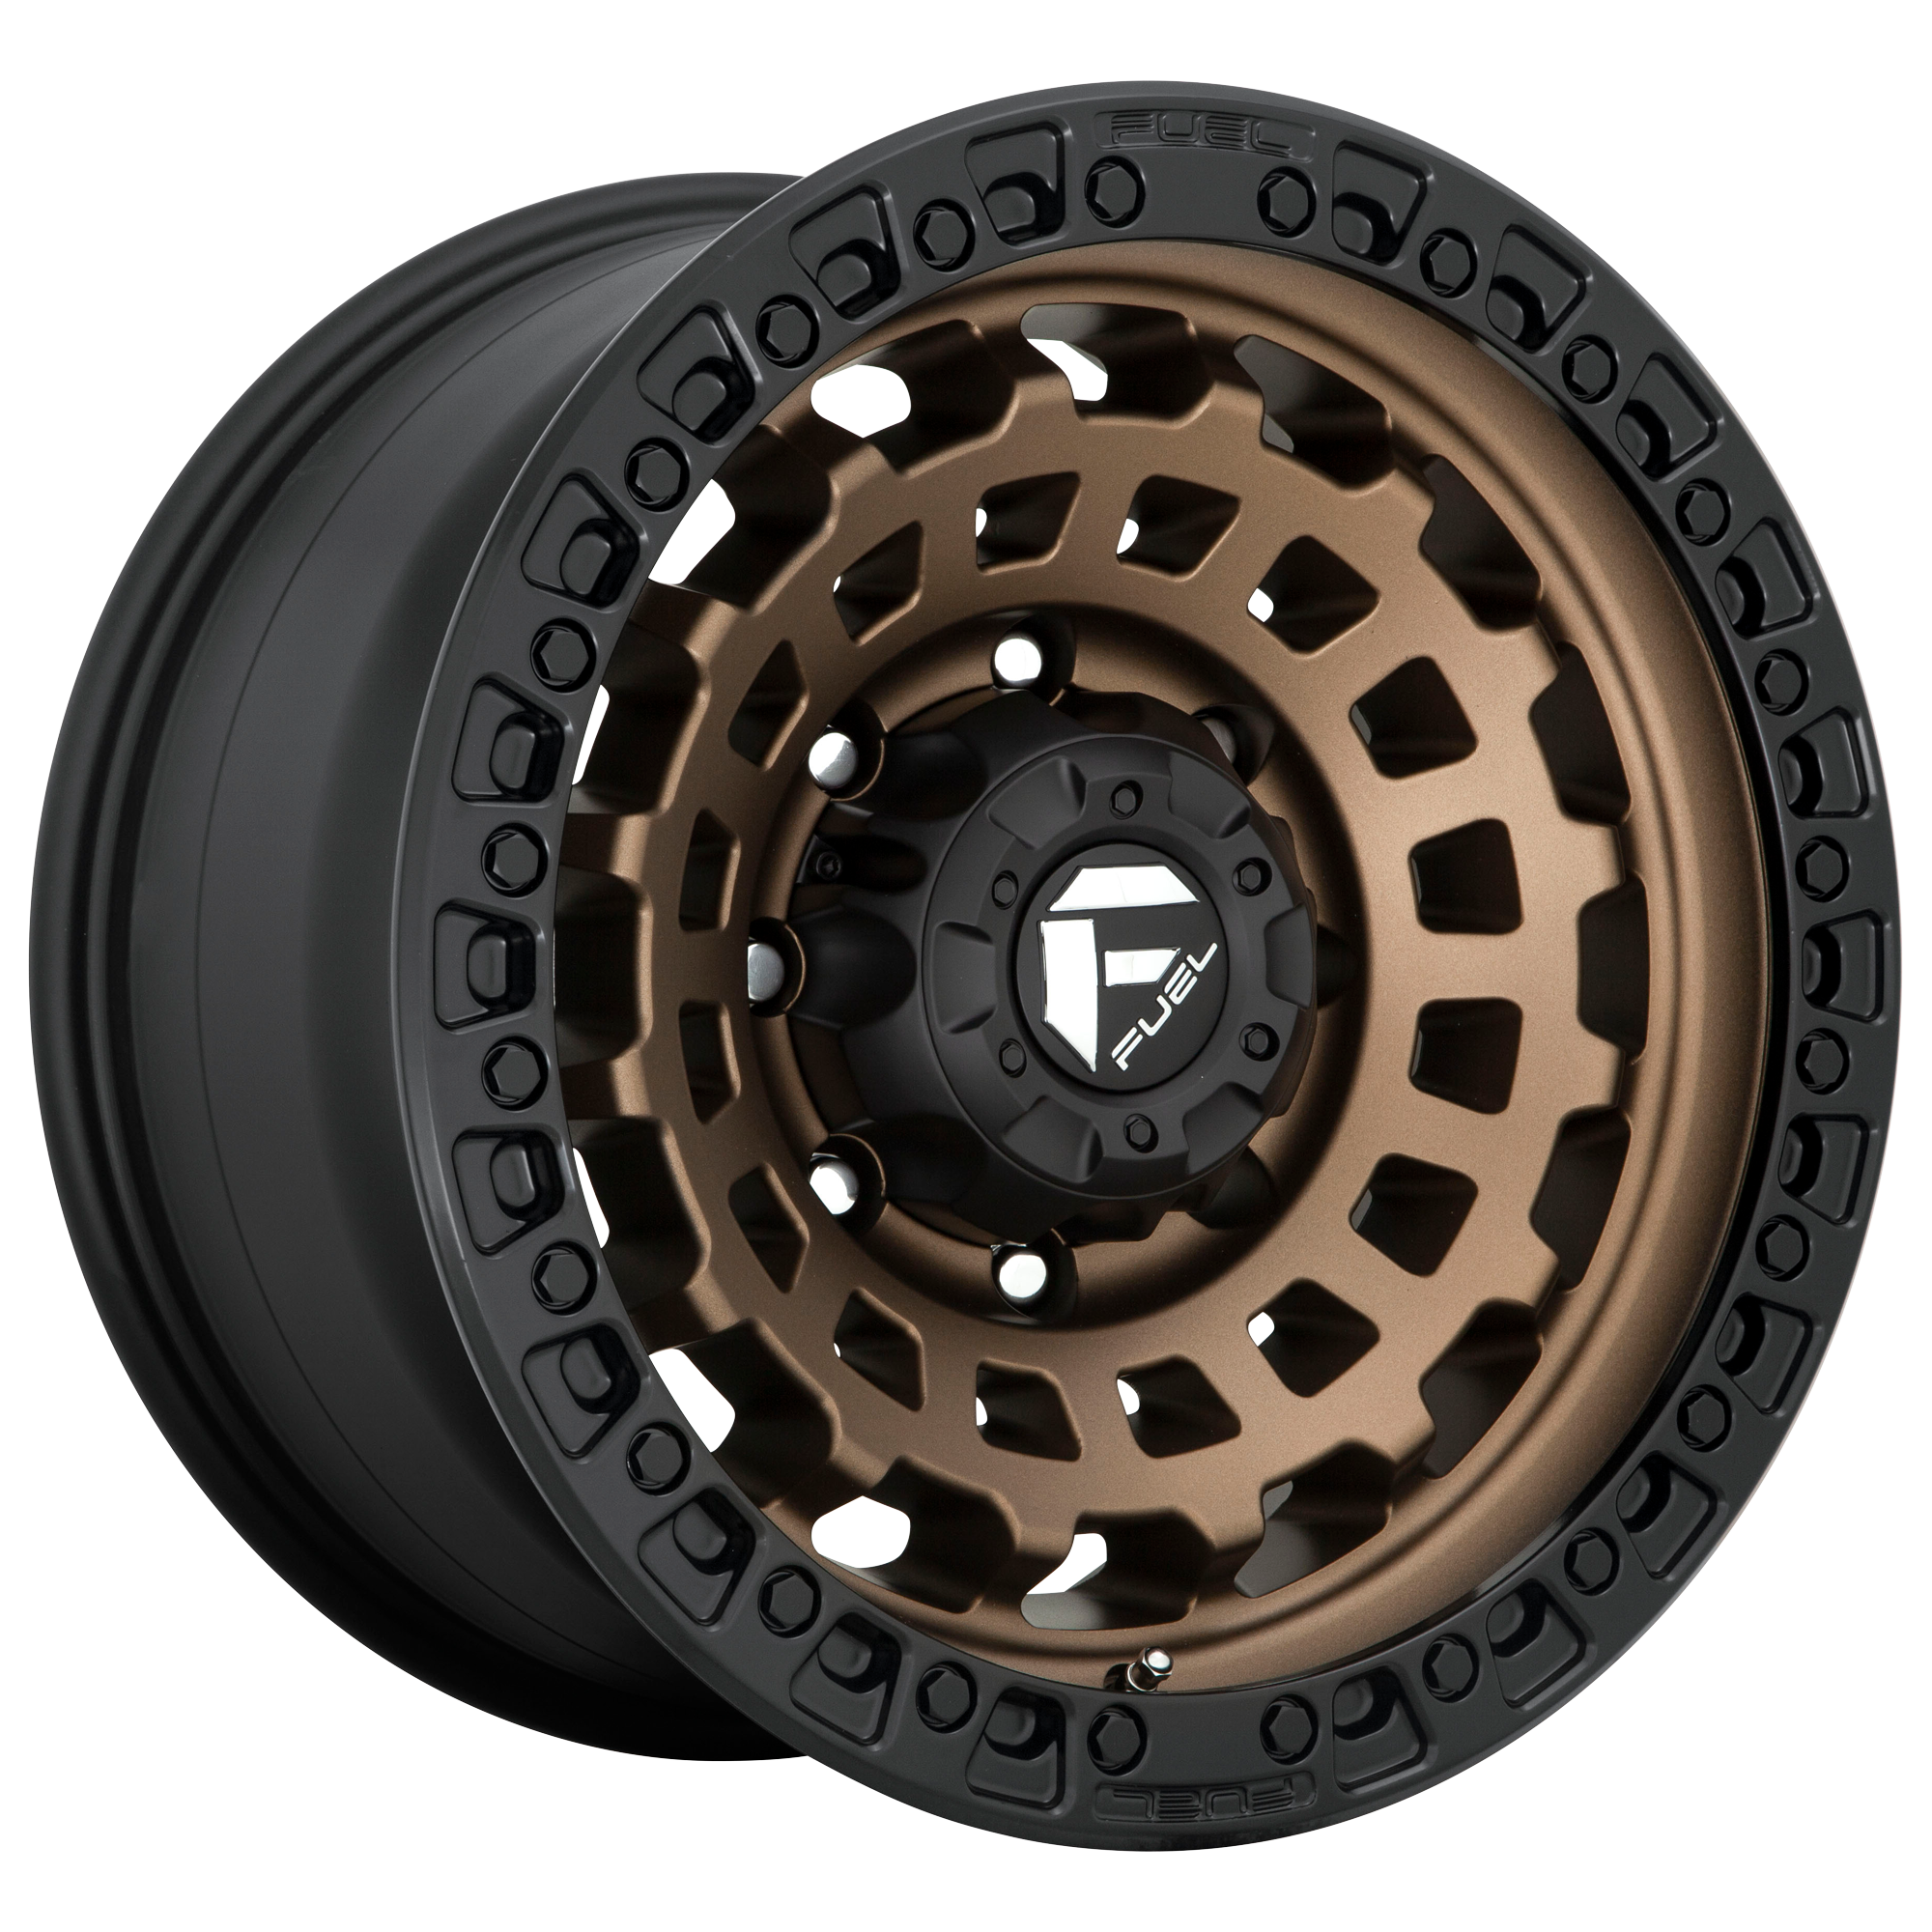 ZEPHYR 20x9 6x135.00 MATTE BRONZE BLACK BEAD RING (20 mm) - Tires and Engine Performance